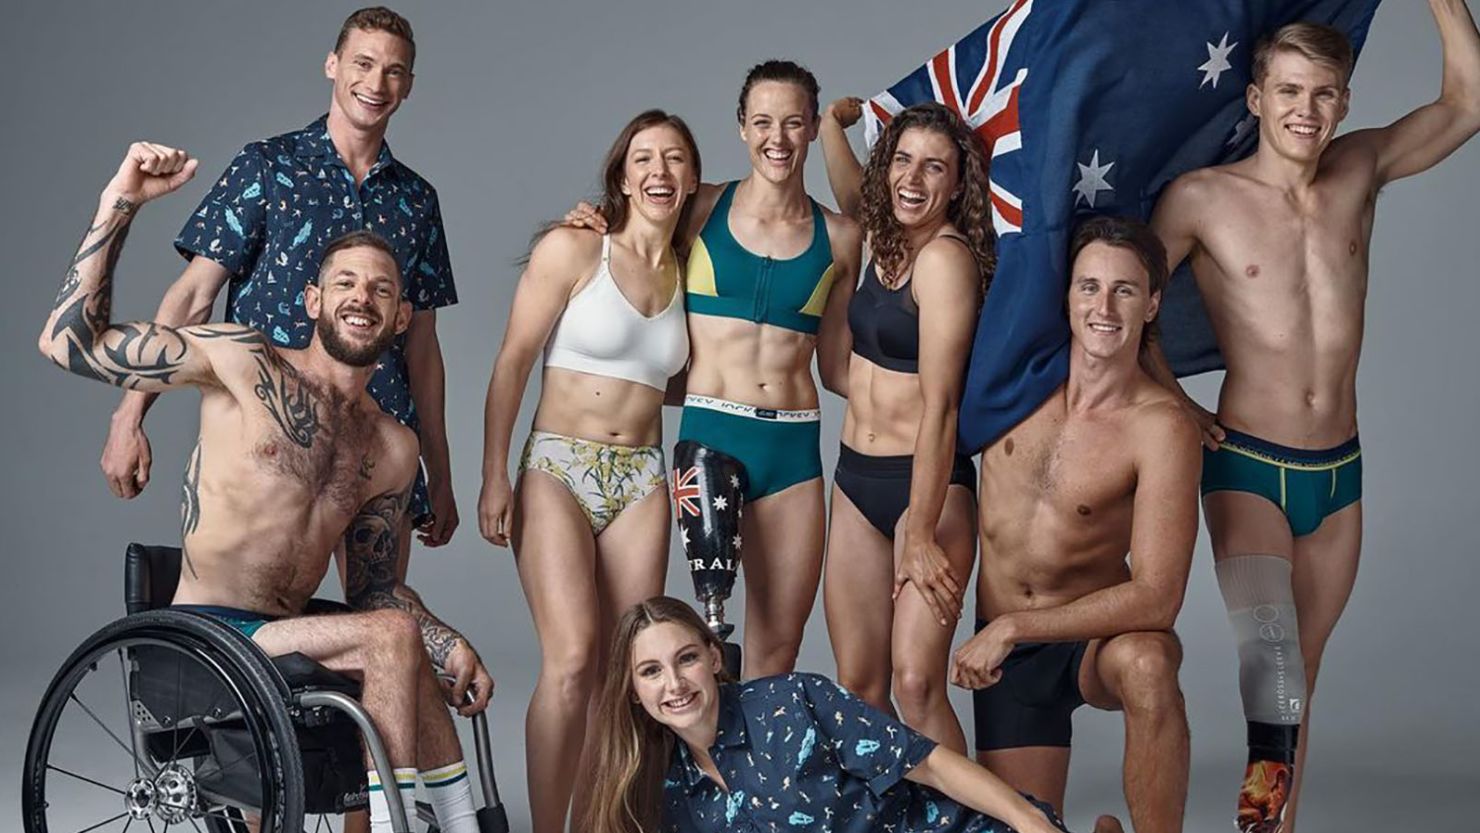 Cambage has criticized the lack of diversity in the Australian Olympic Committee's photoshoots, including this one first posted by clothing brand Jockey, which is sponsoring the Australian Olympic team.